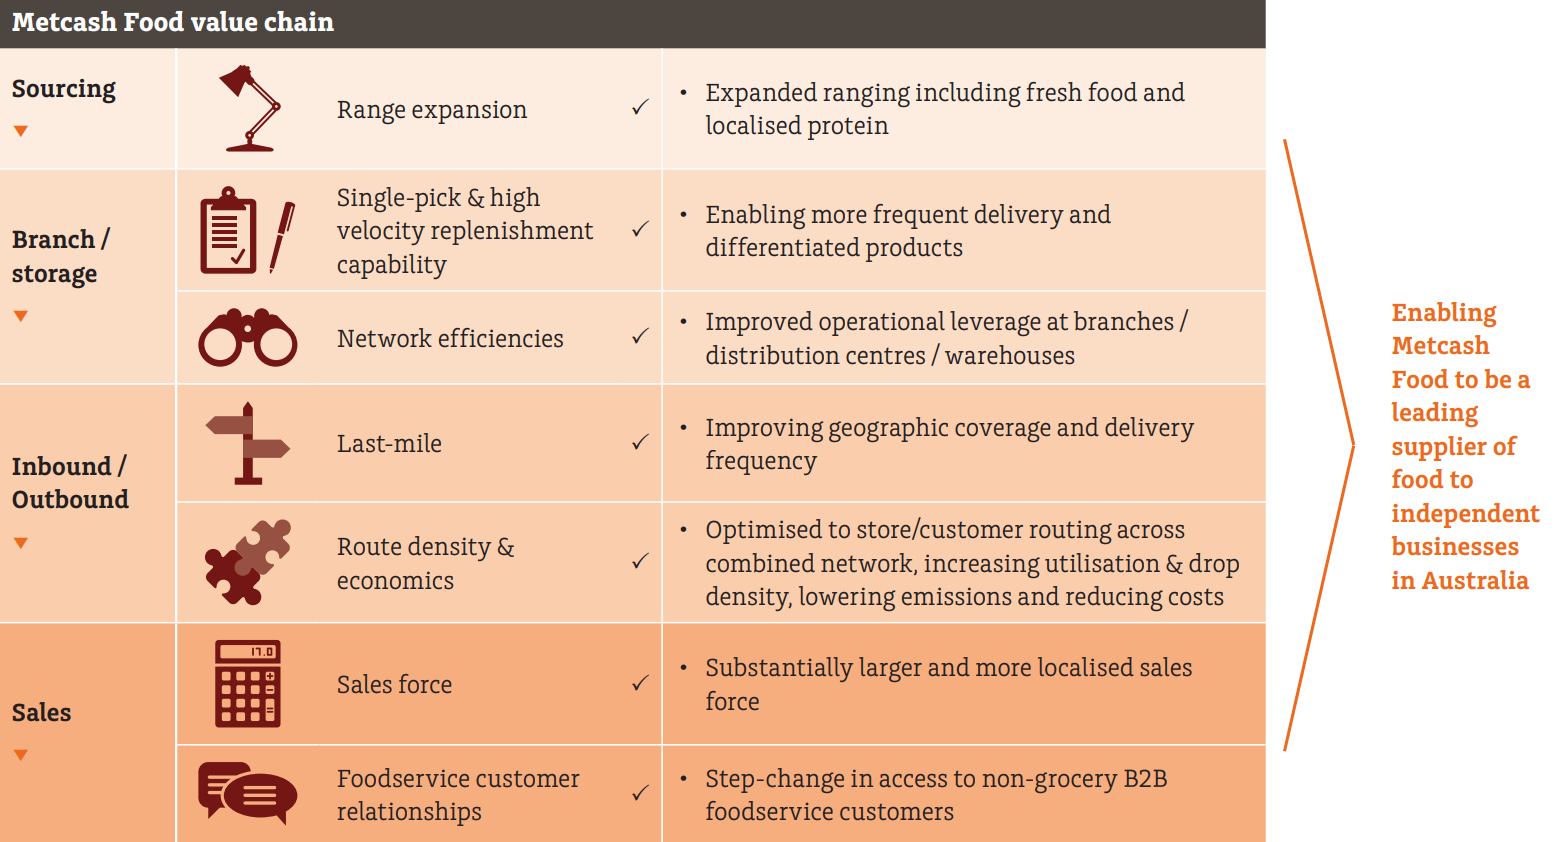 Source: Metcash Investor Presentation. Acquisition of Superior Food, strategic hardware acquisitions and equity raising, 5 February 2024, (VIEW LINK)